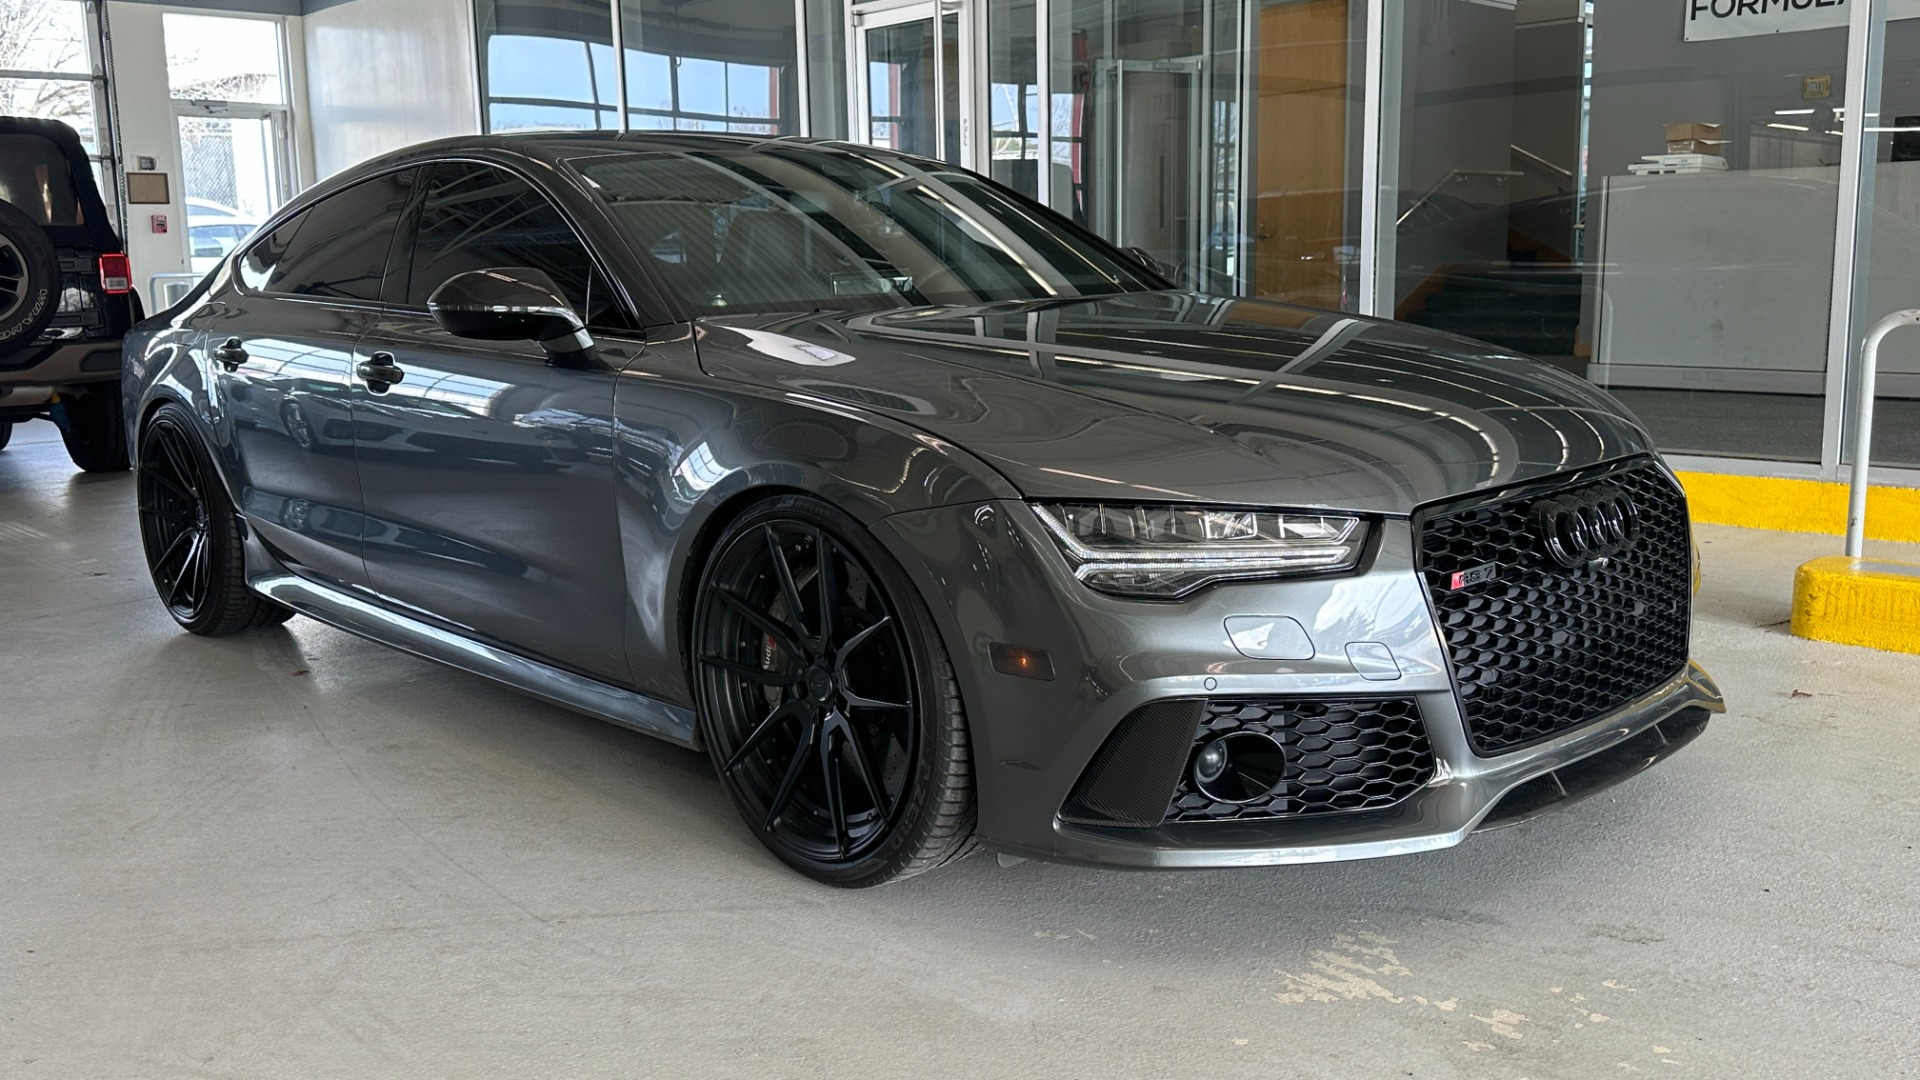 Used 2016 Audi RS 7 PERFORMANCE PRESTIGE / ADV1 WHEELS / EXHAUST / CARBON FIBER for sale $79,995 at Formula Imports in Charlotte NC 28227 2